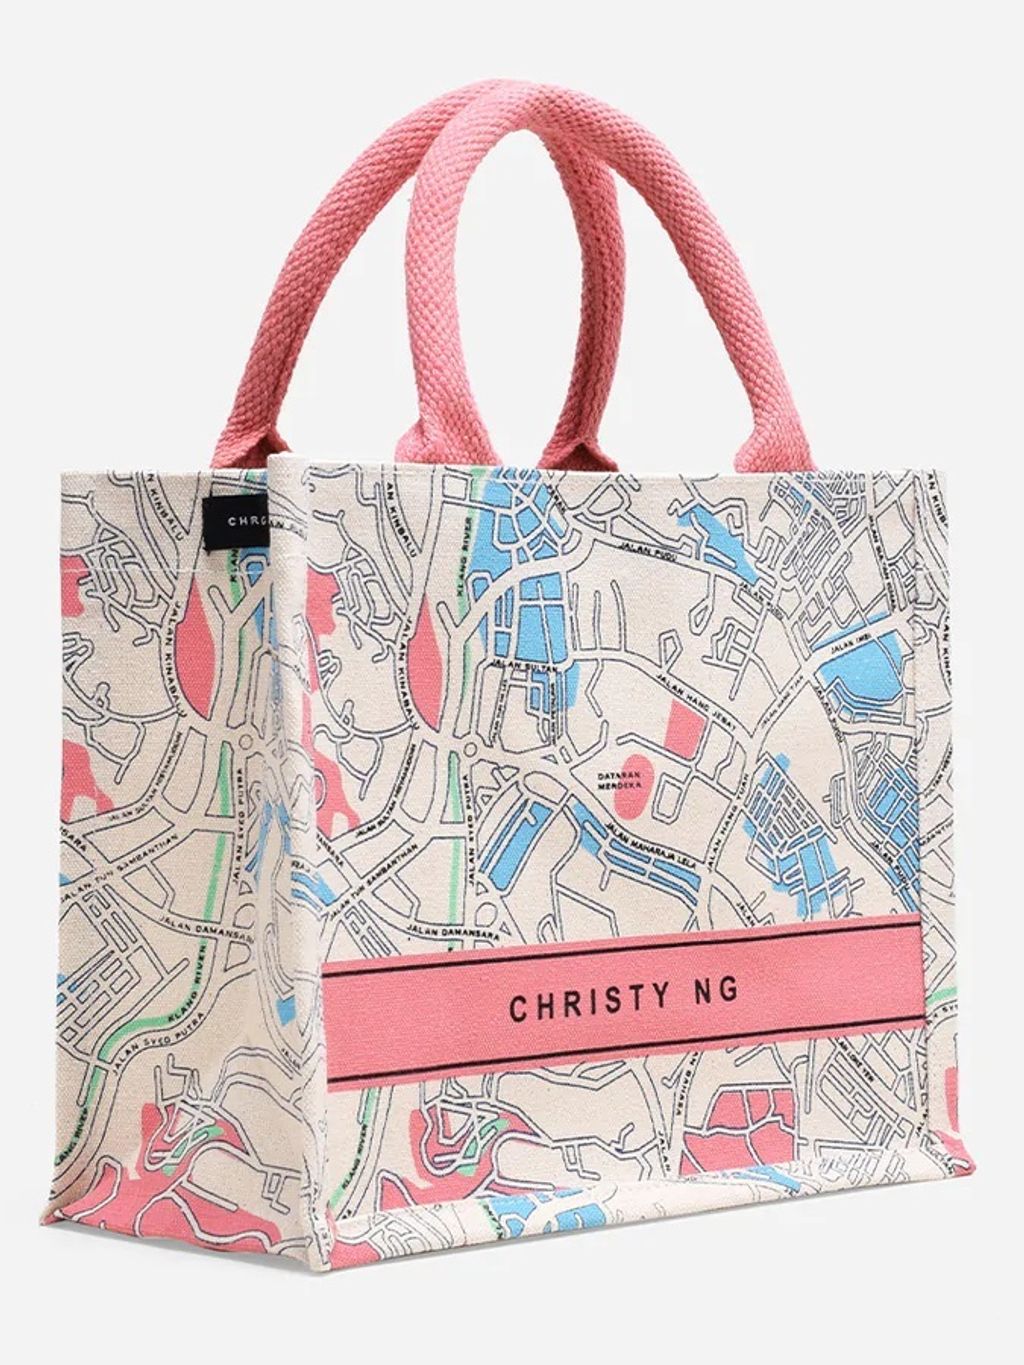 CHRISTY NG SINGAPORE 22 MINI/ GROCERY TOTE-No Embroidery/No Add Name